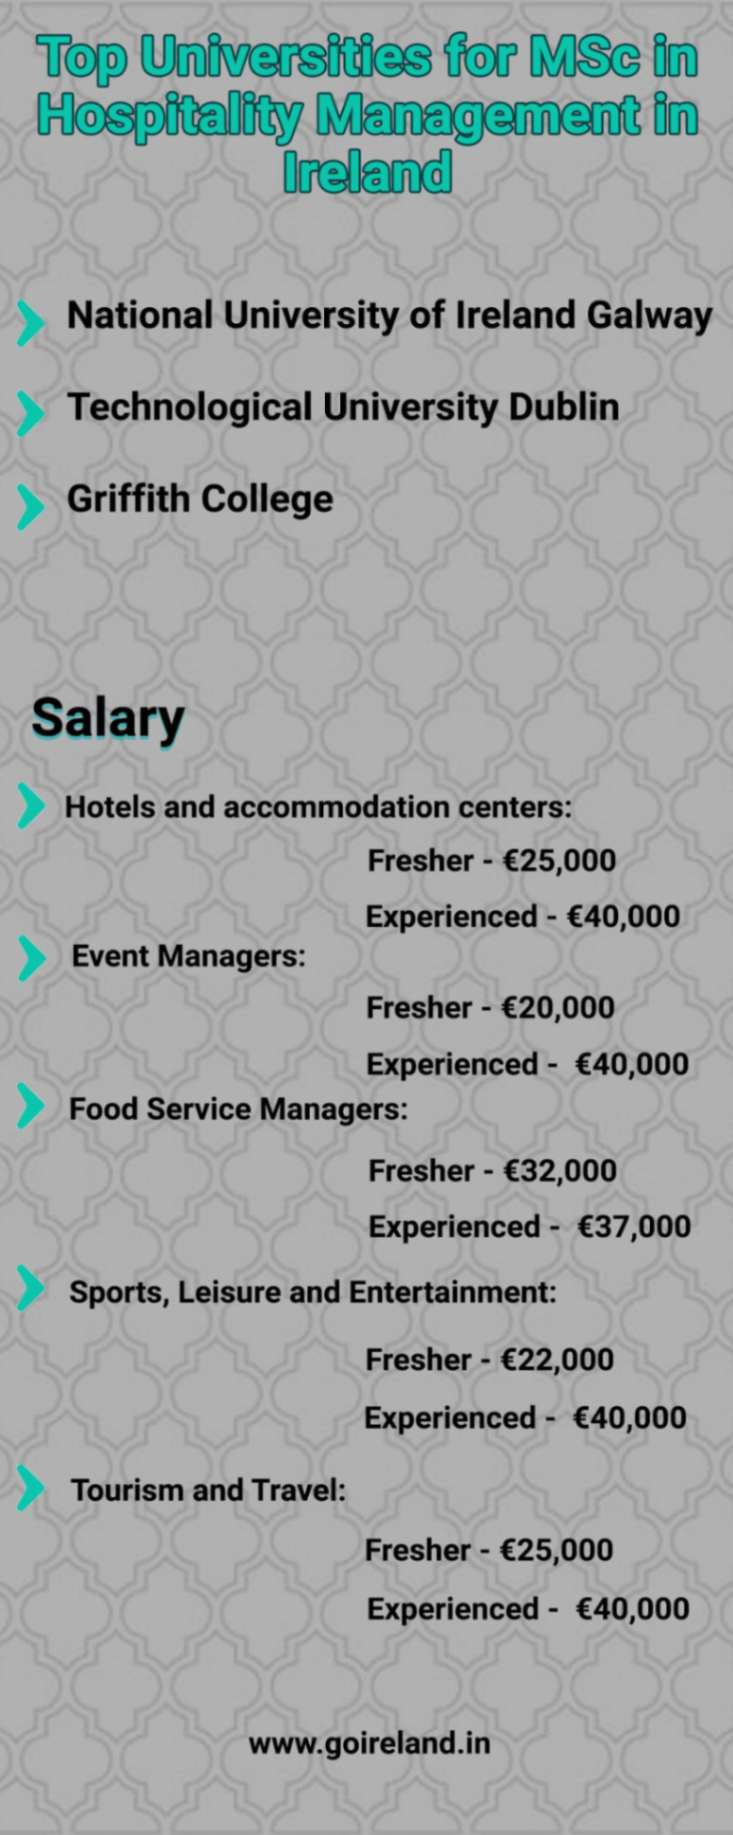 Top Universities for MSc in Hospitality Management in Ireland